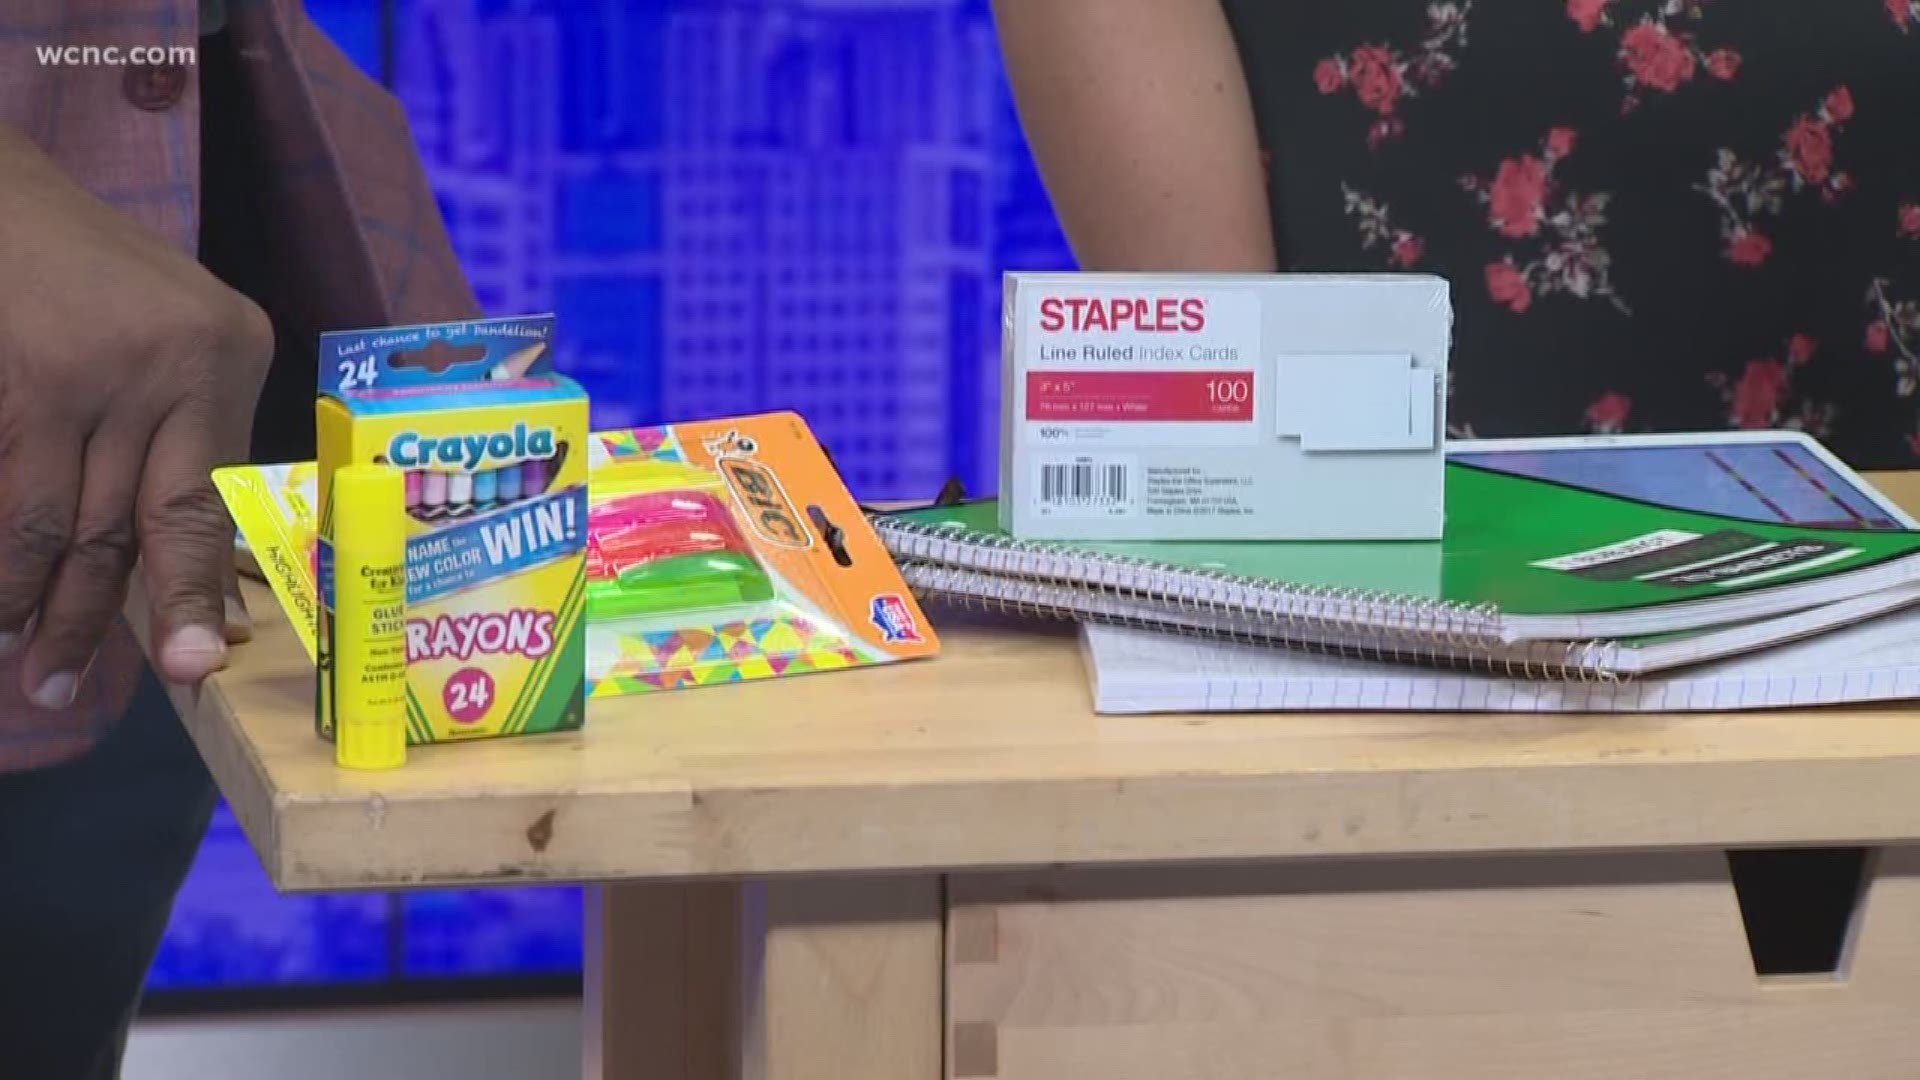 Jenny Martin with Southern Savers shares creative ways to save money on supplies and electronics this back to school season.